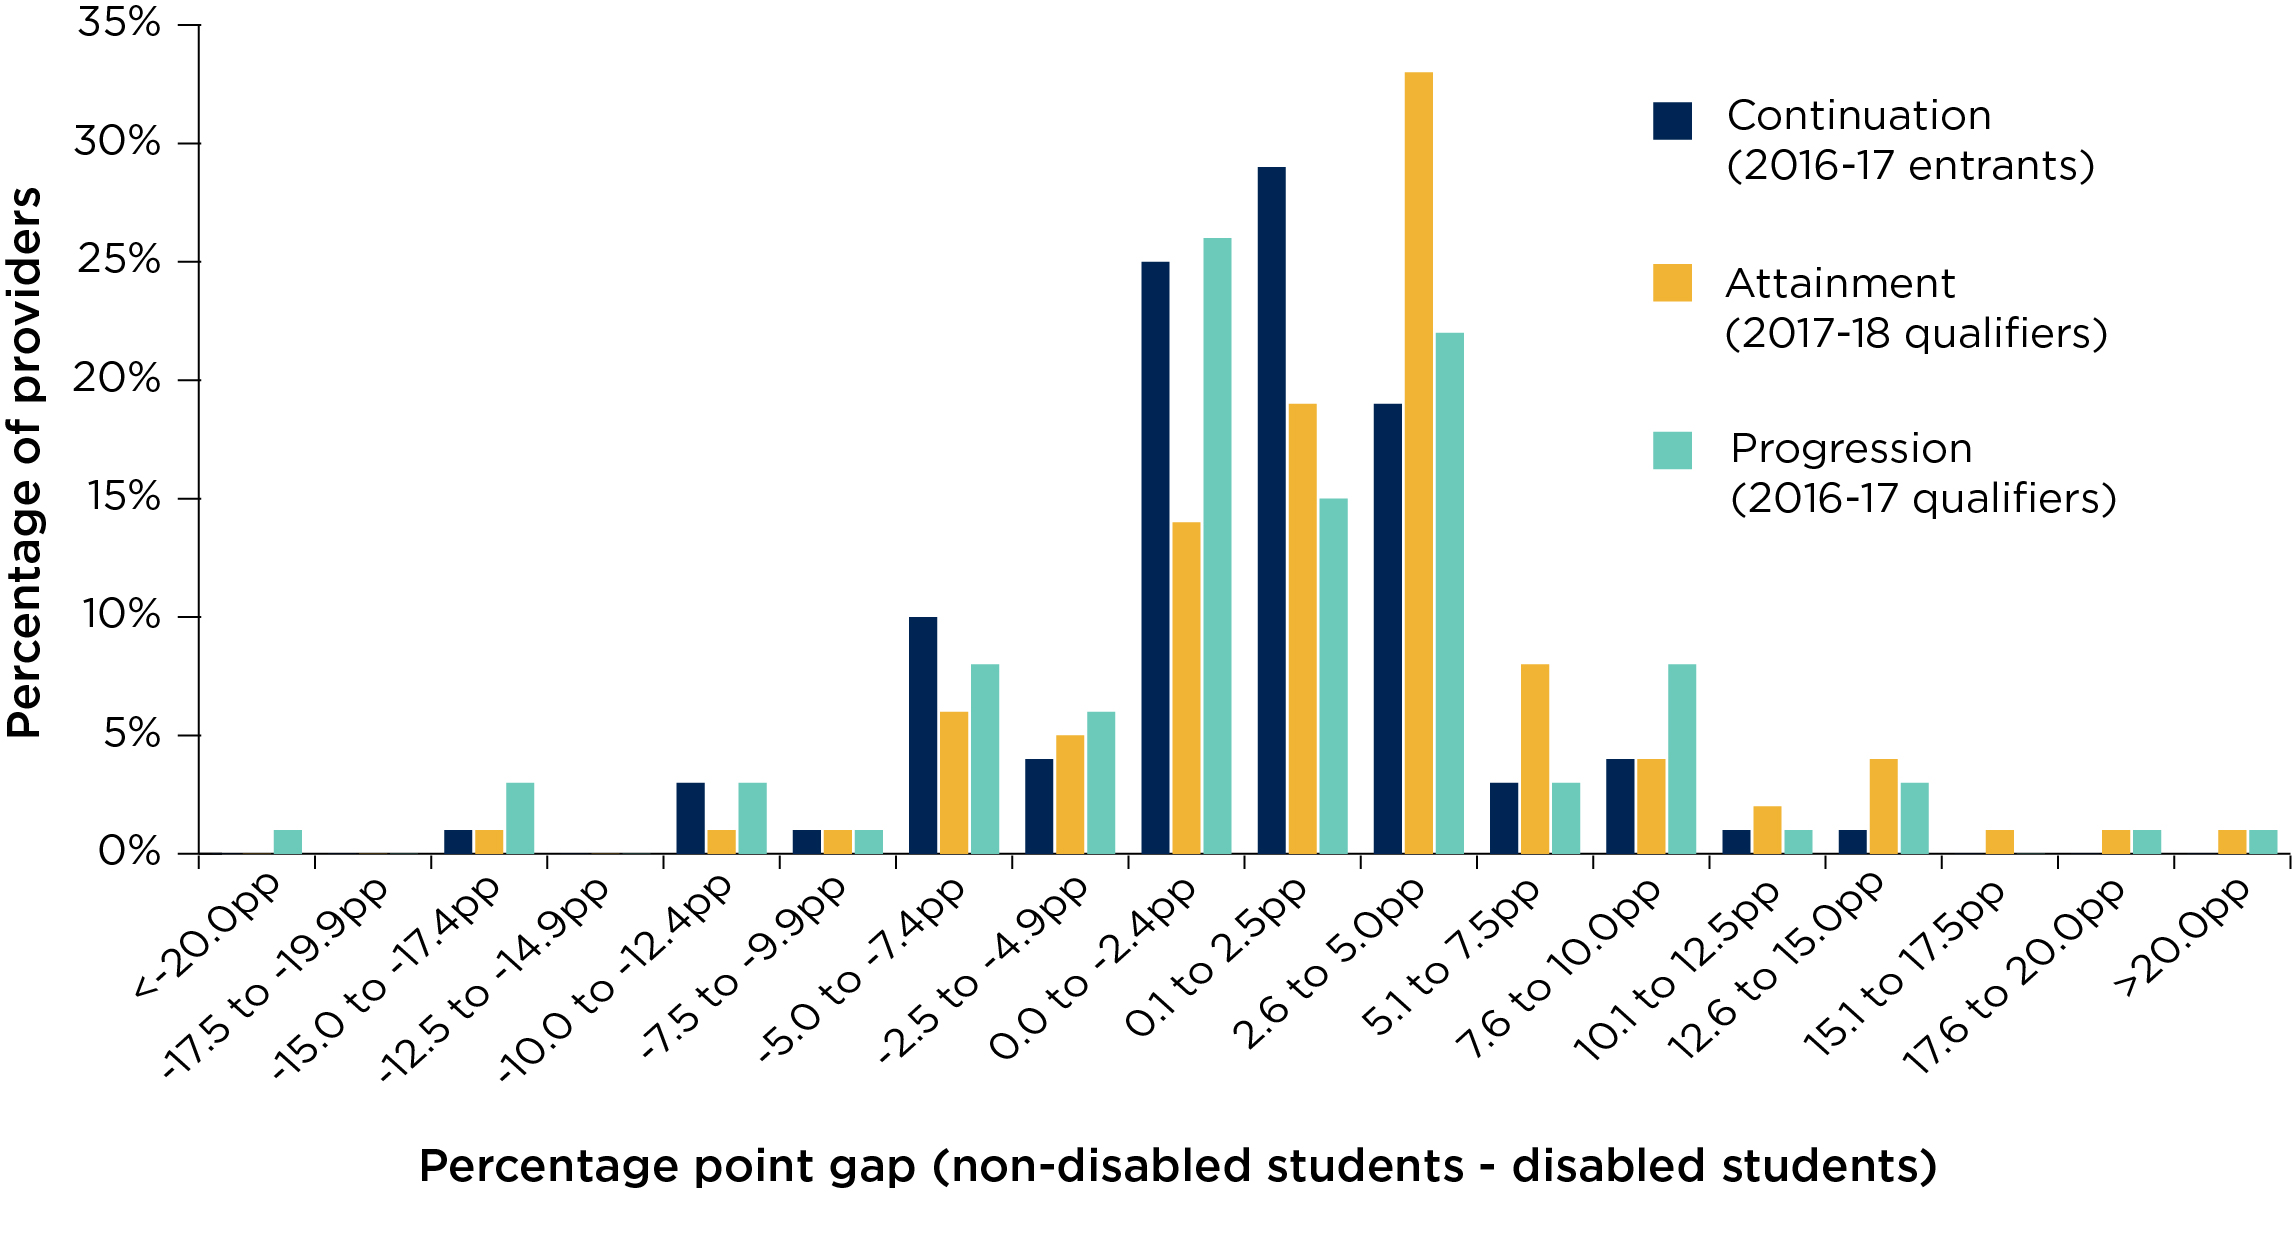 Figure 2: Gaps in continuation, attainment and progression rates between non-disabled students and disabled students